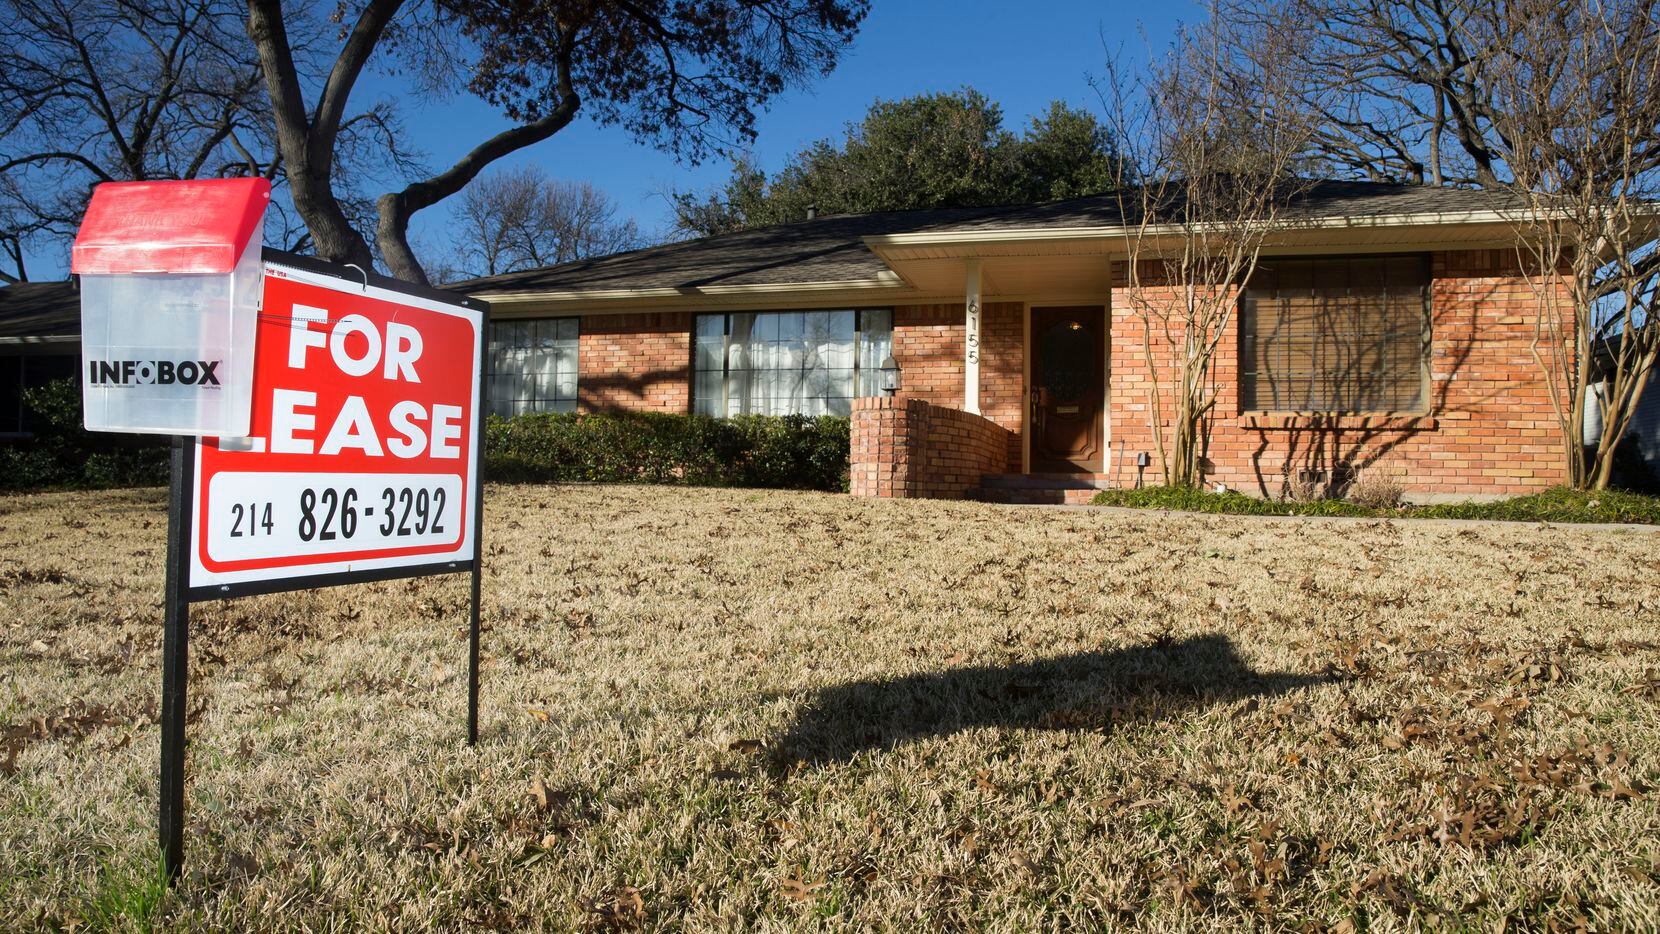 More than 8 percent of the houses sold in the Dallas area last year went to investors who...